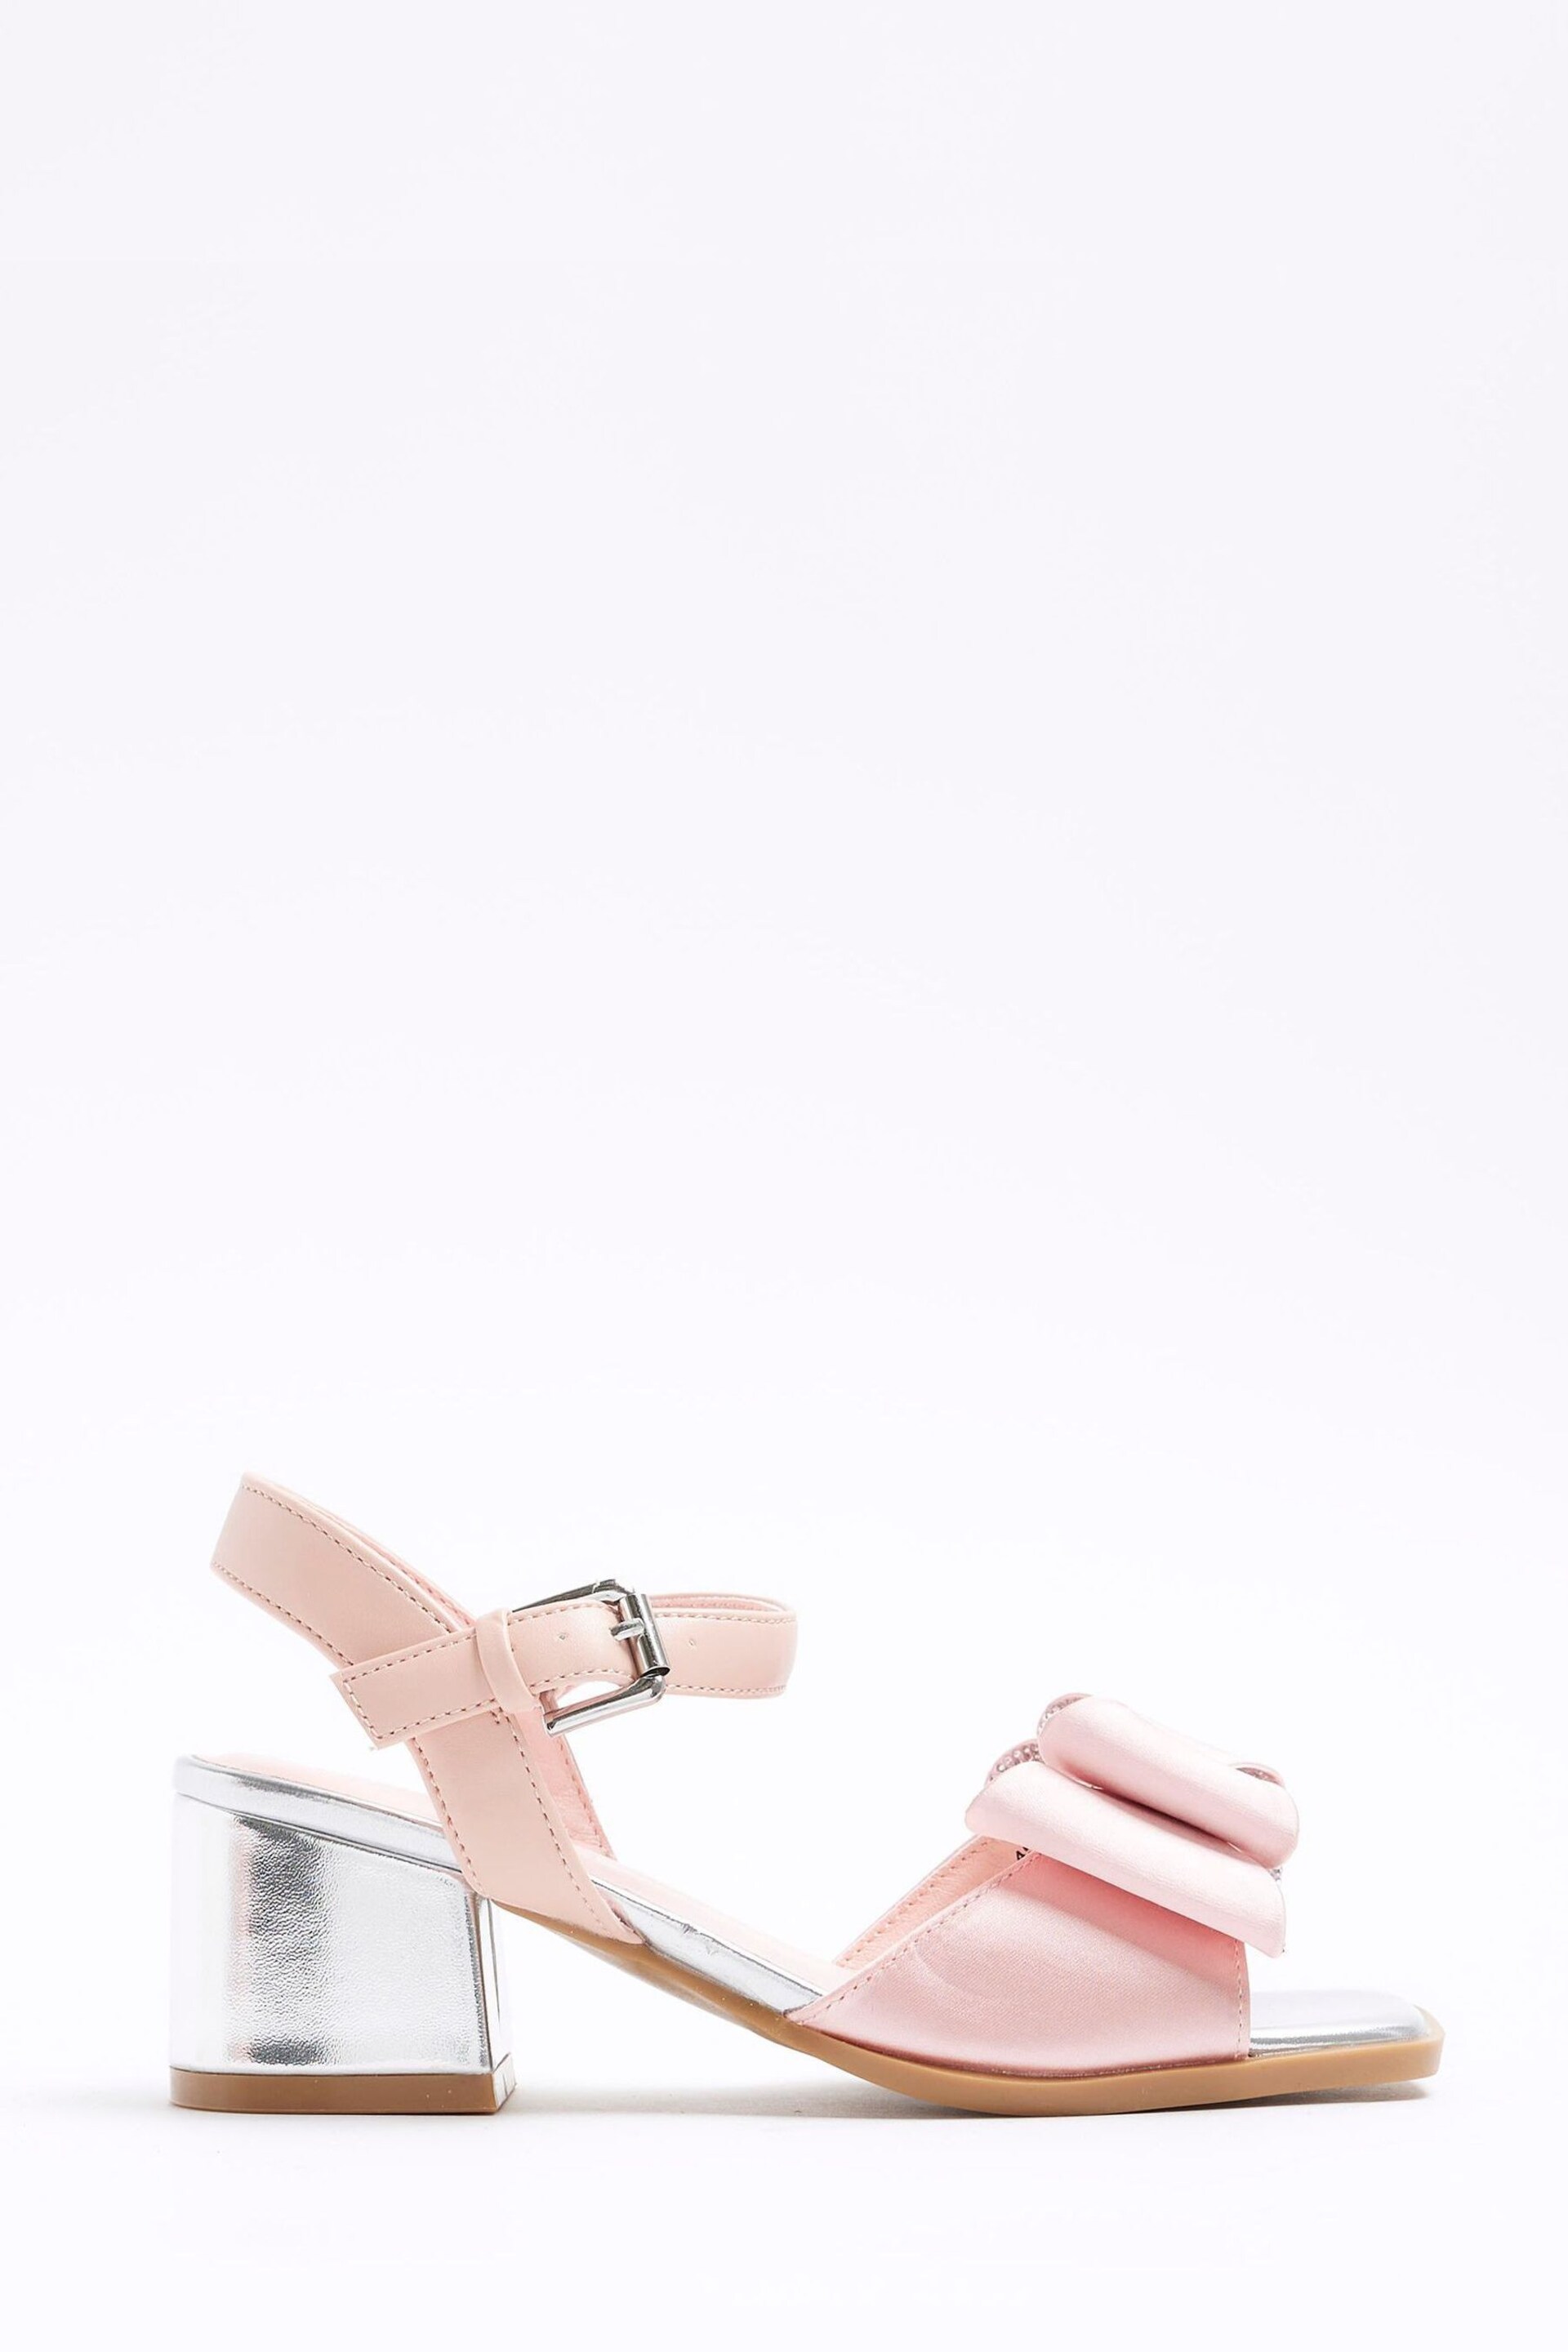 River Island Pink Girls Satin Bow Heeled Sandals - Image 1 of 5